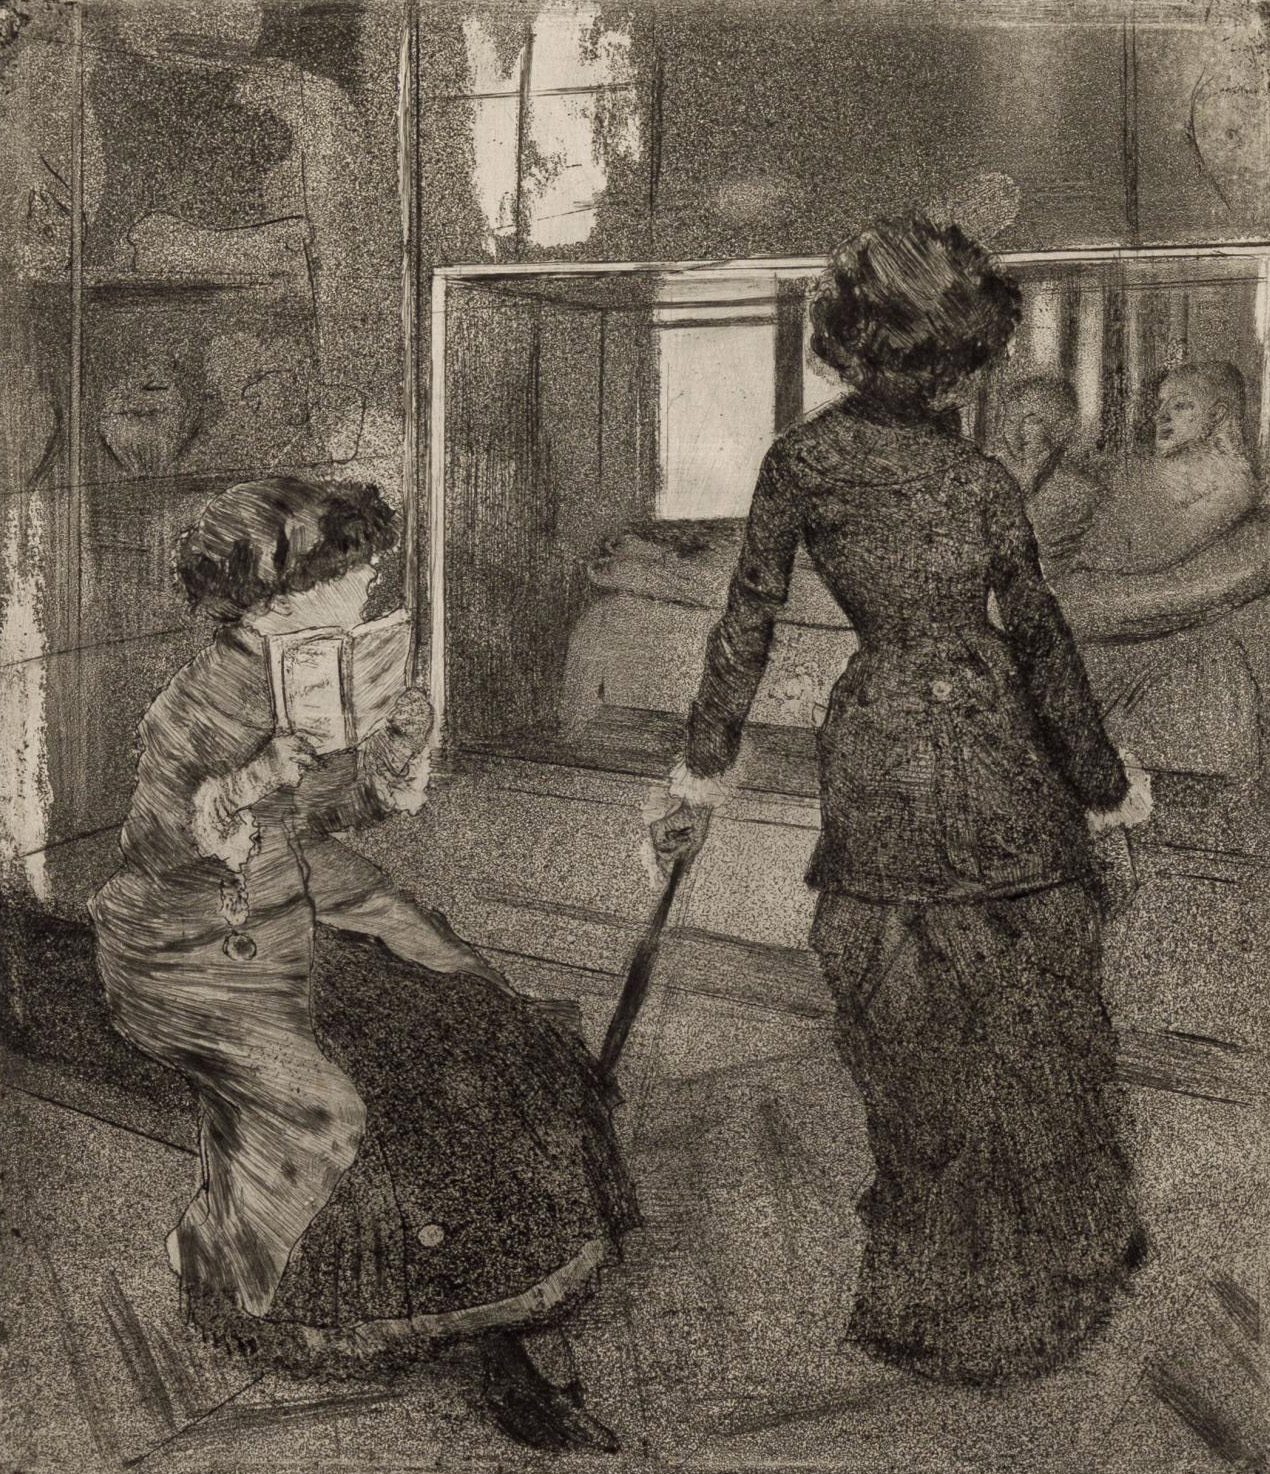 Edgar Degas (1834-1917), Mary Cassatt at the Louvre: The Etruscan Gallery, c. 1879-1880, etching, drypoint and aquatint on cream laid pape